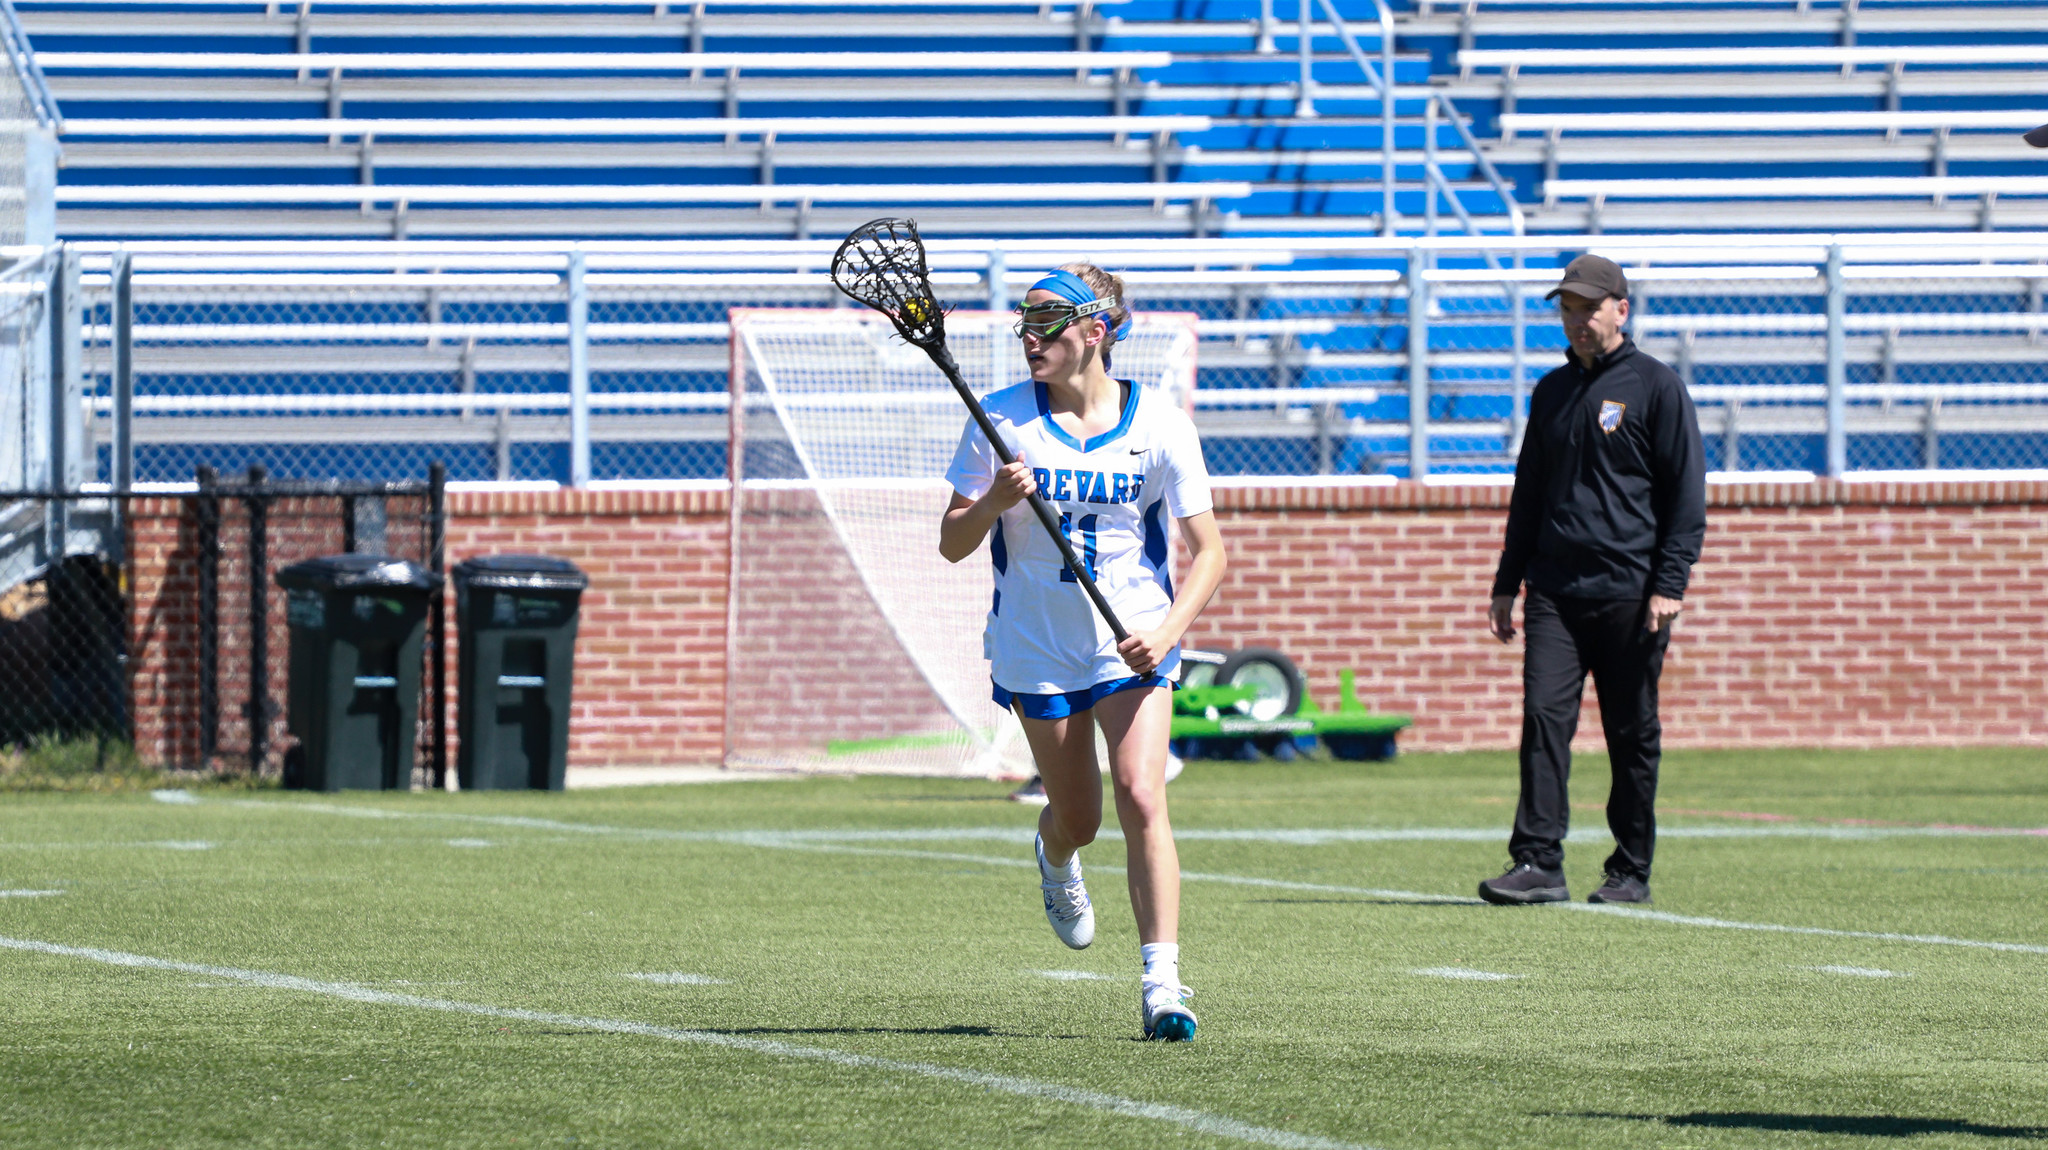 Women’s Lacrosse Dominates Spalding, 19-1 at Home